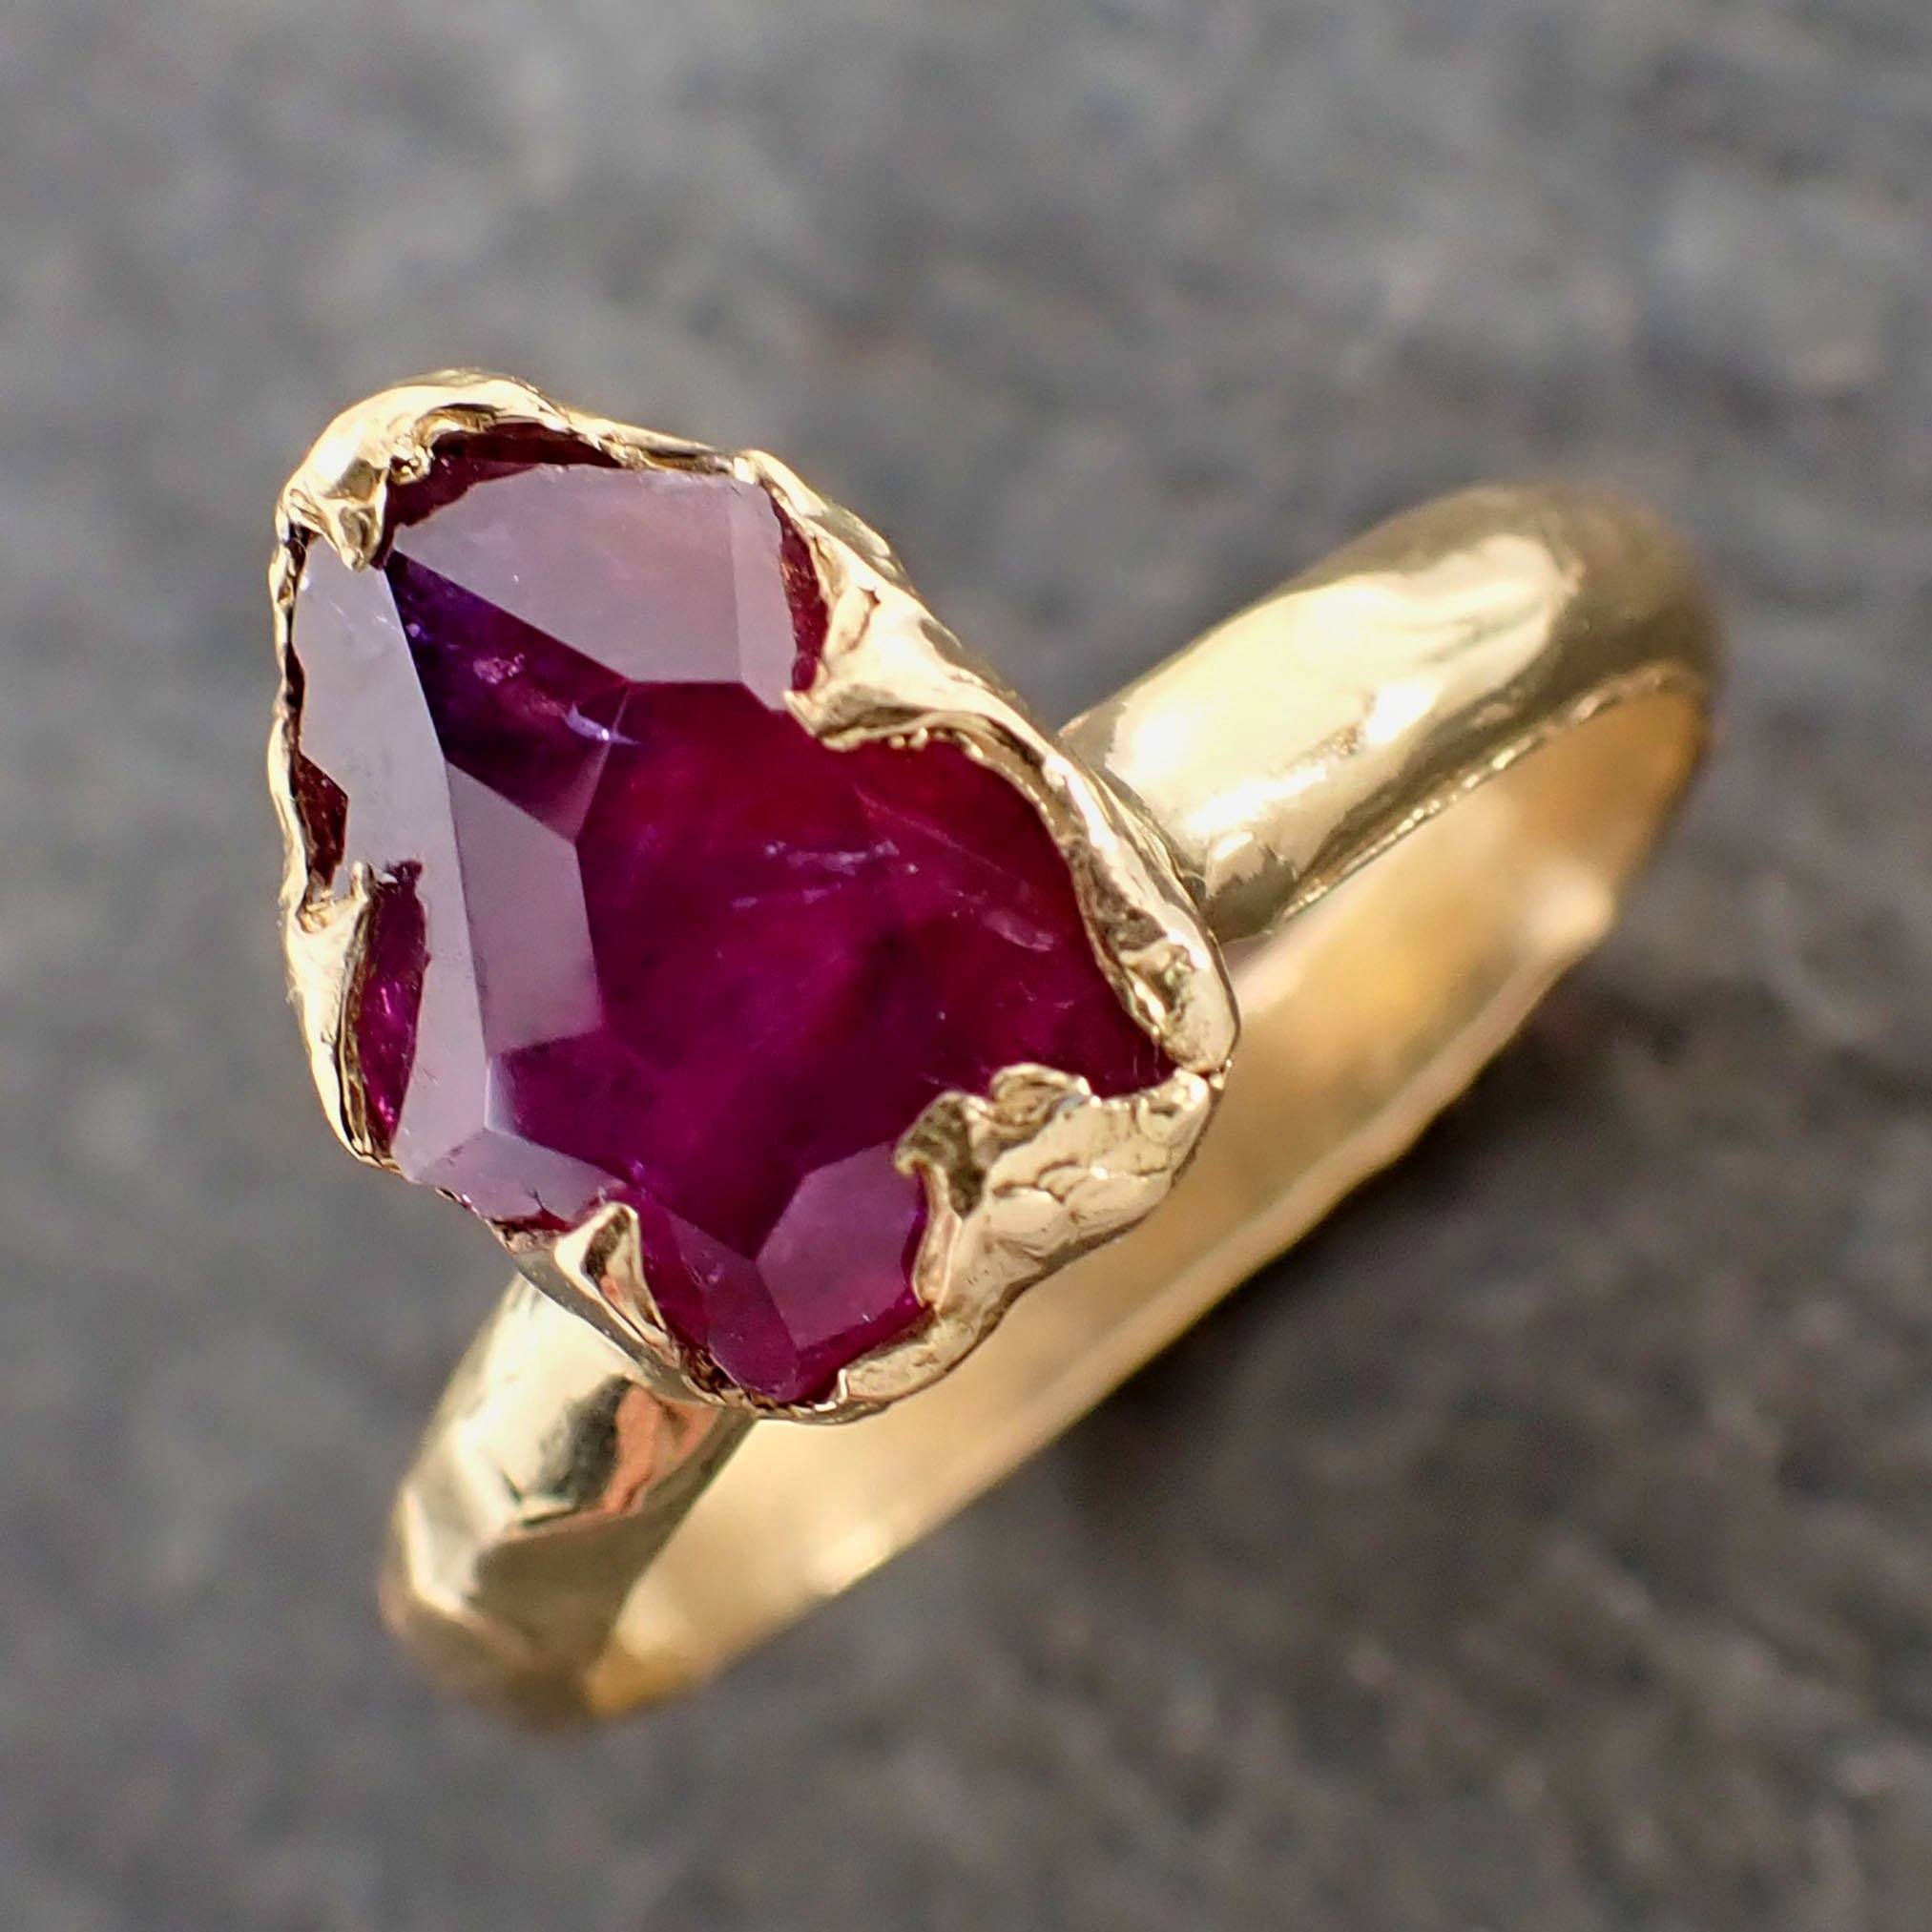 Partially Faceted Sapphire Solitaire 18k yellow Gold Engagement Ring Wedding Ring Custom One Of a Kind Gemstone Ring 2154